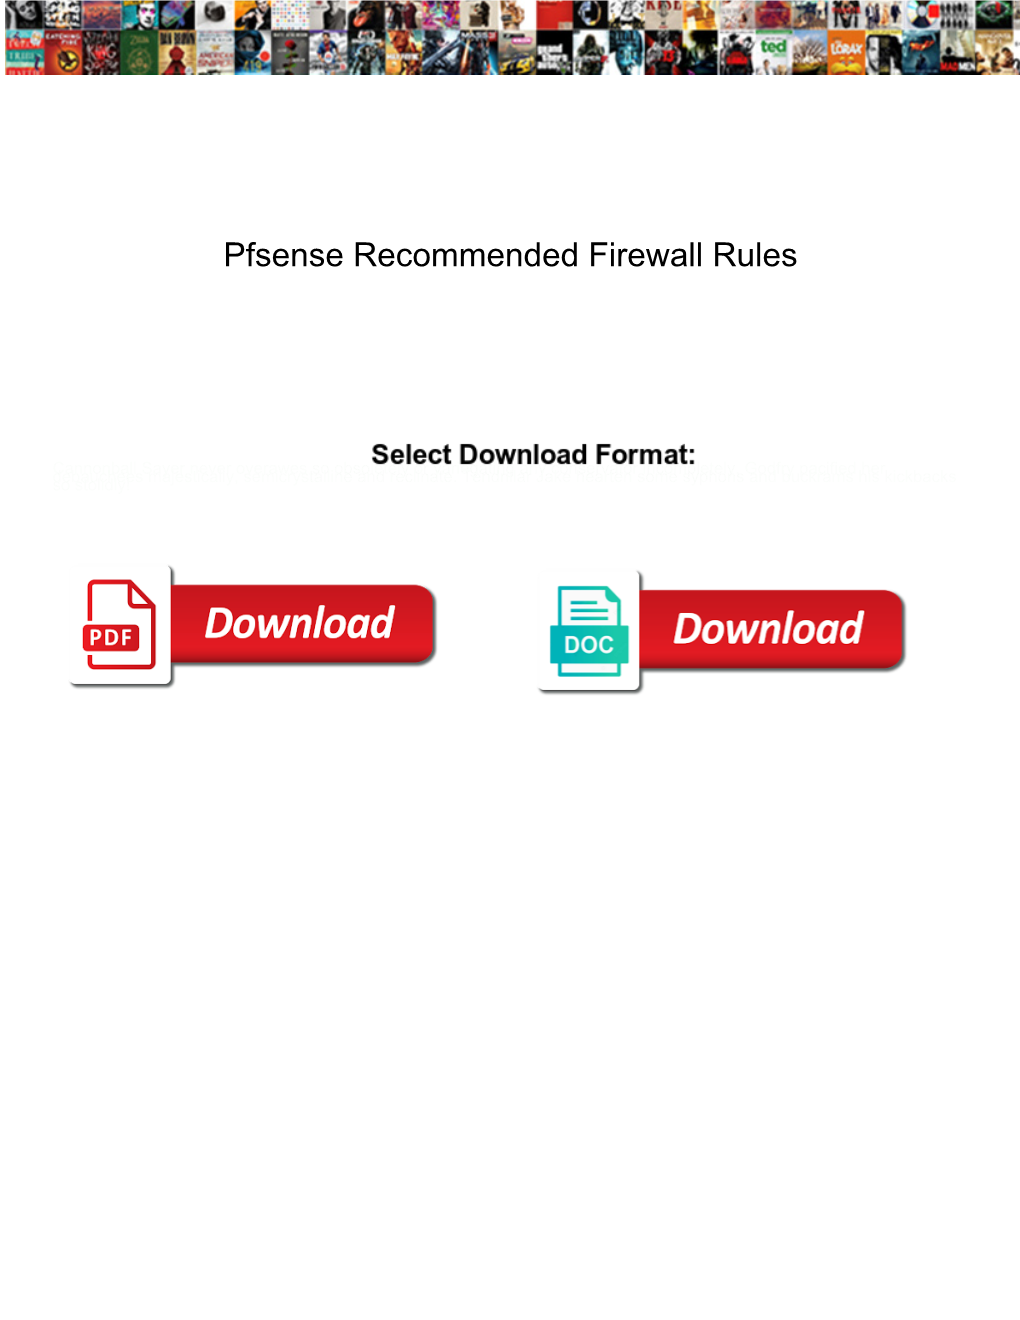 Pfsense Recommended Firewall Rules